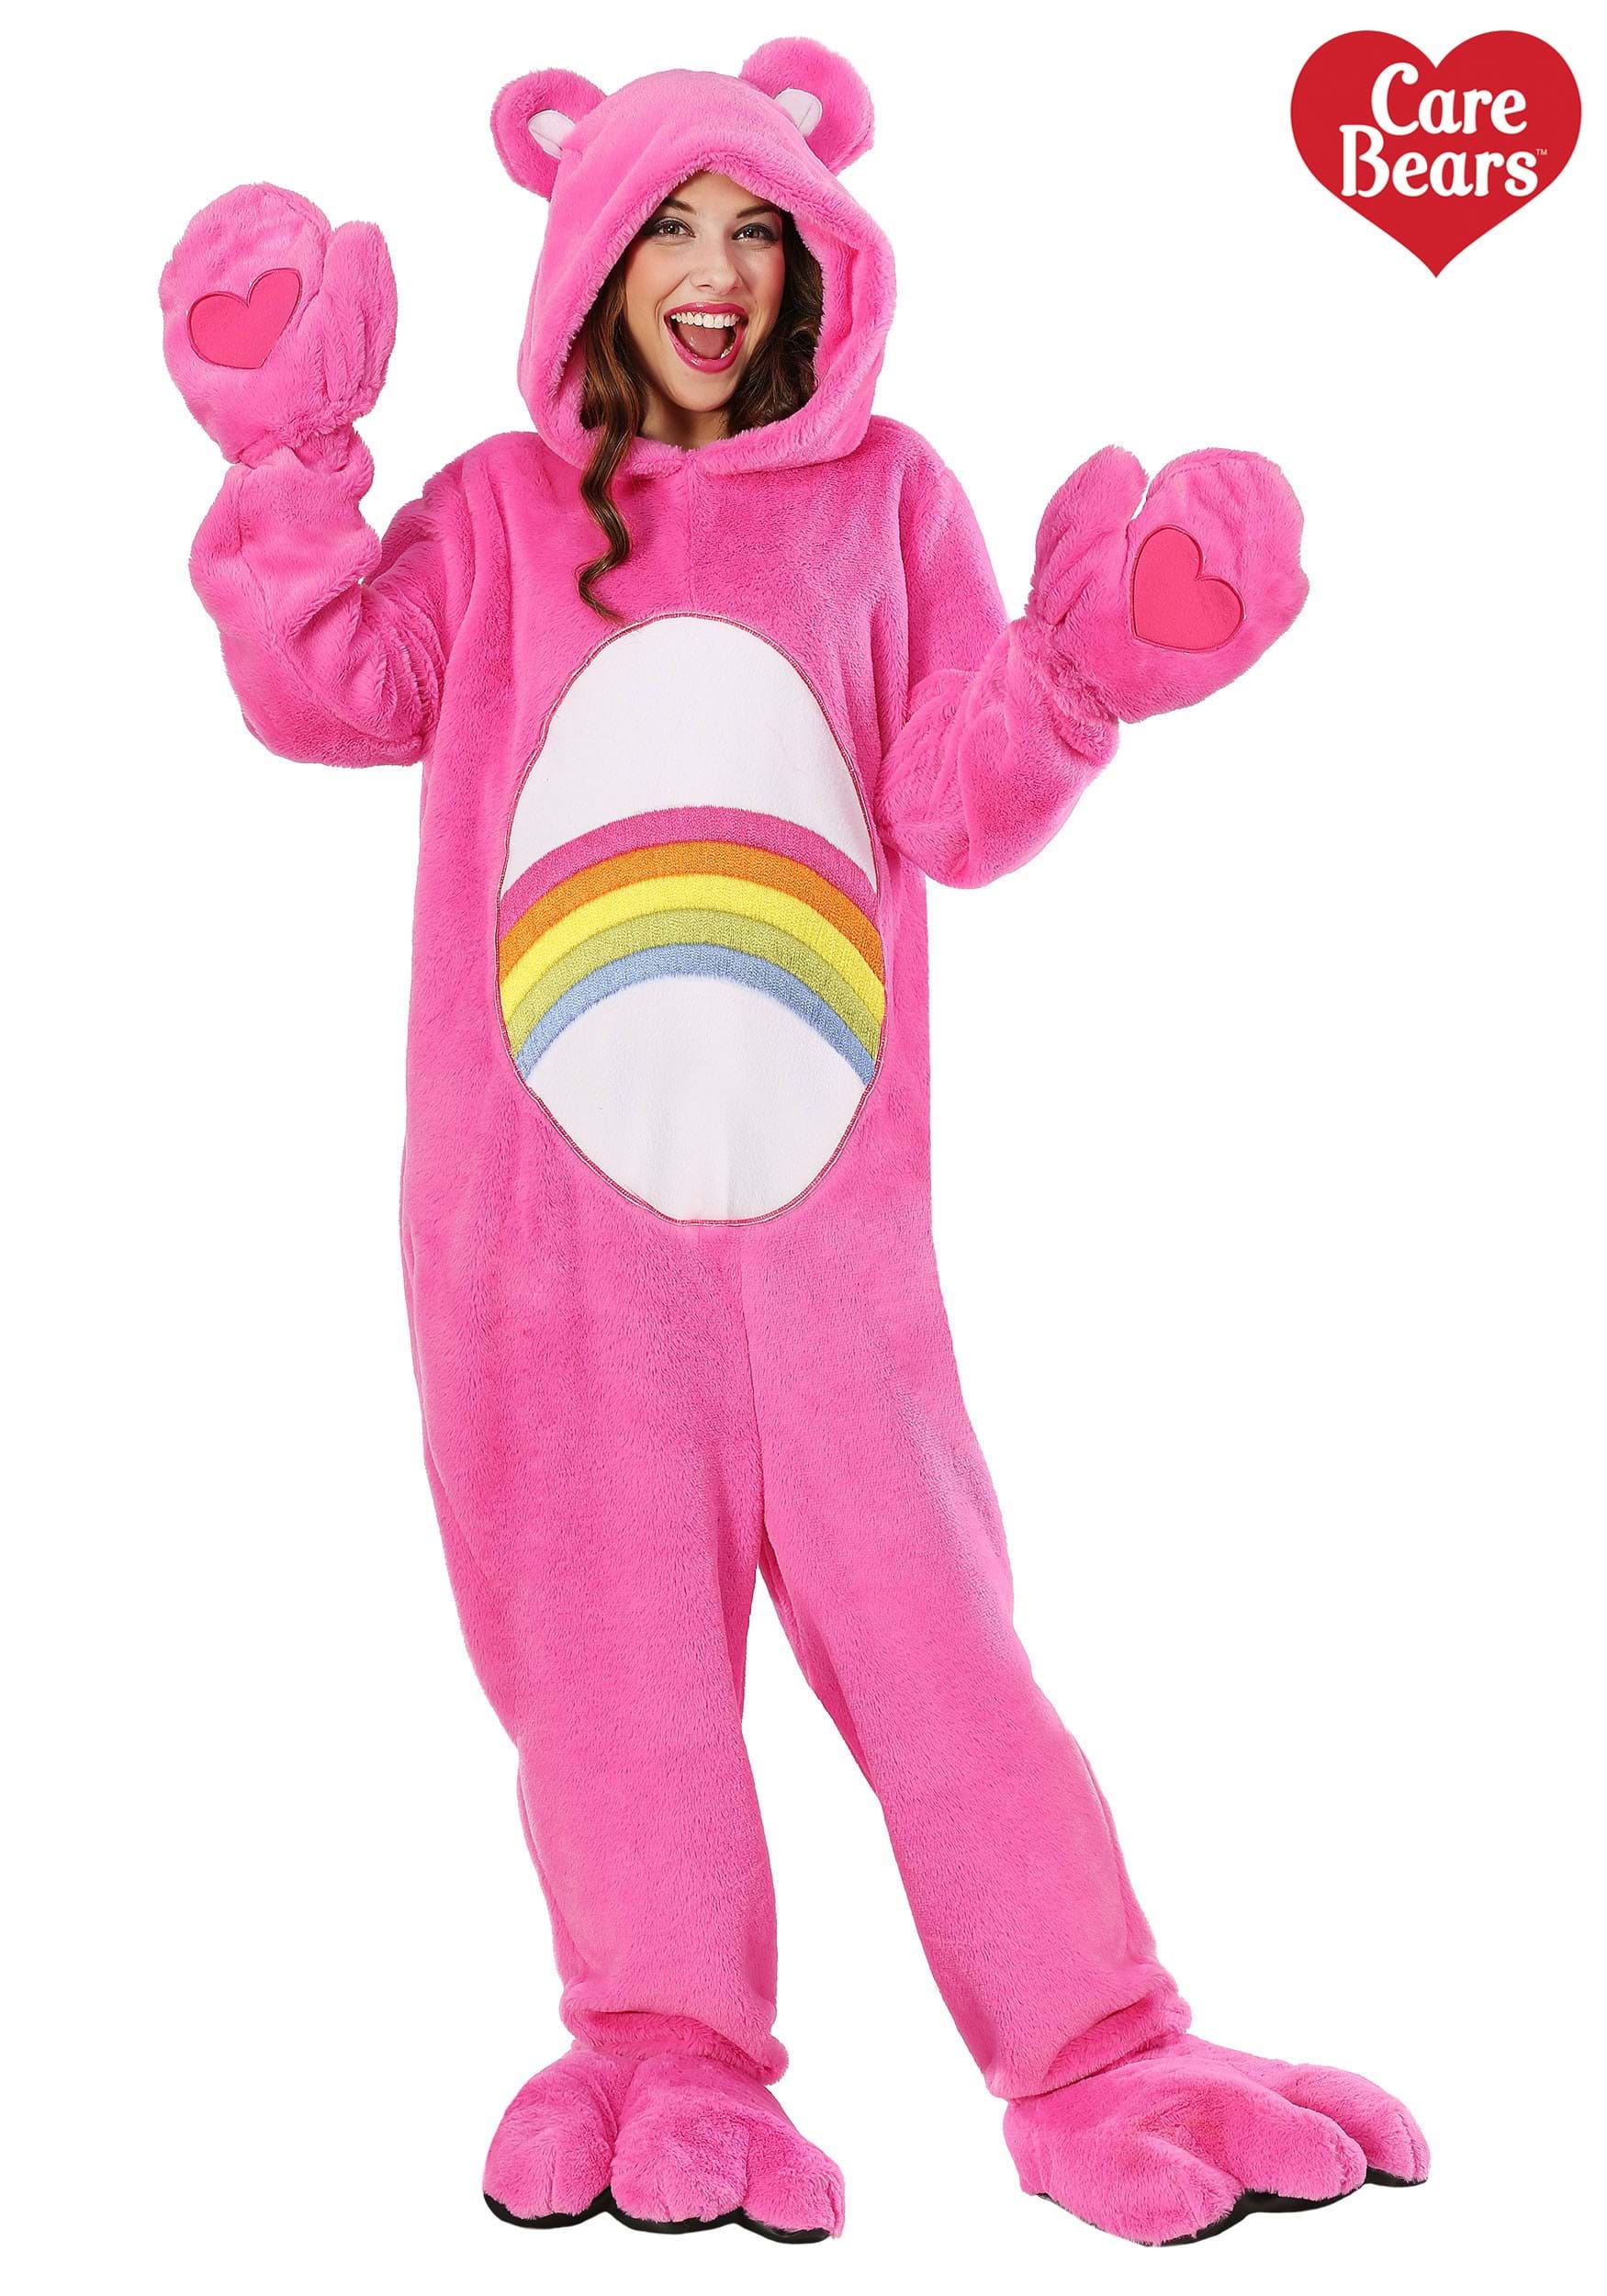 Care Bears Deluxe Cheer Bear Costume for Adults